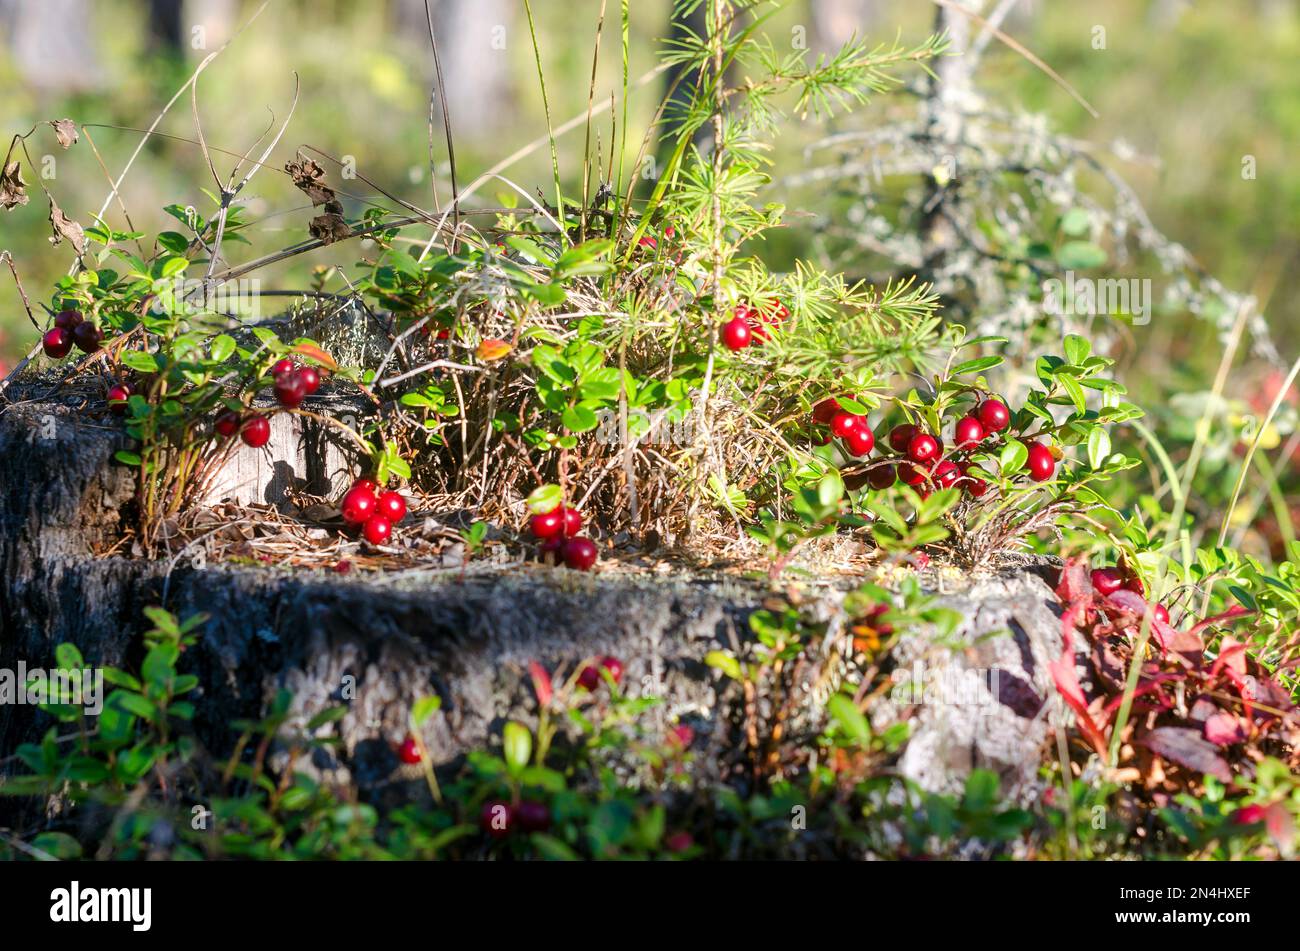 The bright sun illuminates the juicy red berries of cranberries growing thick bushes on an old stump under a young tree in the Northern tundra of Russ Stock Photo